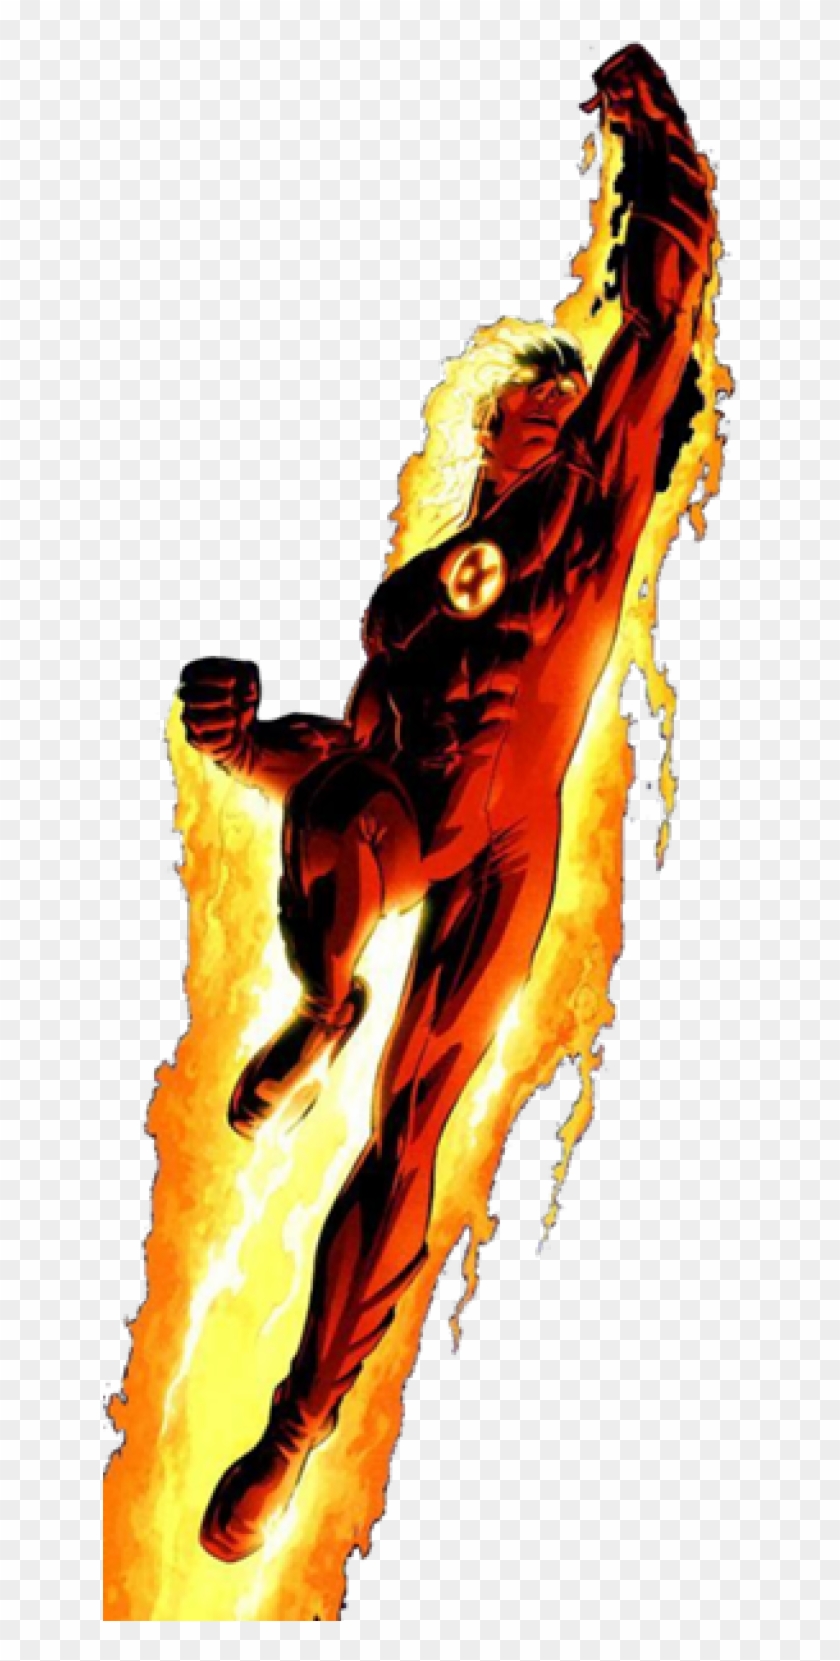 Marvel Fantastic Four Logo Images Gallery - Human Torch Transparent Clipart #2959699